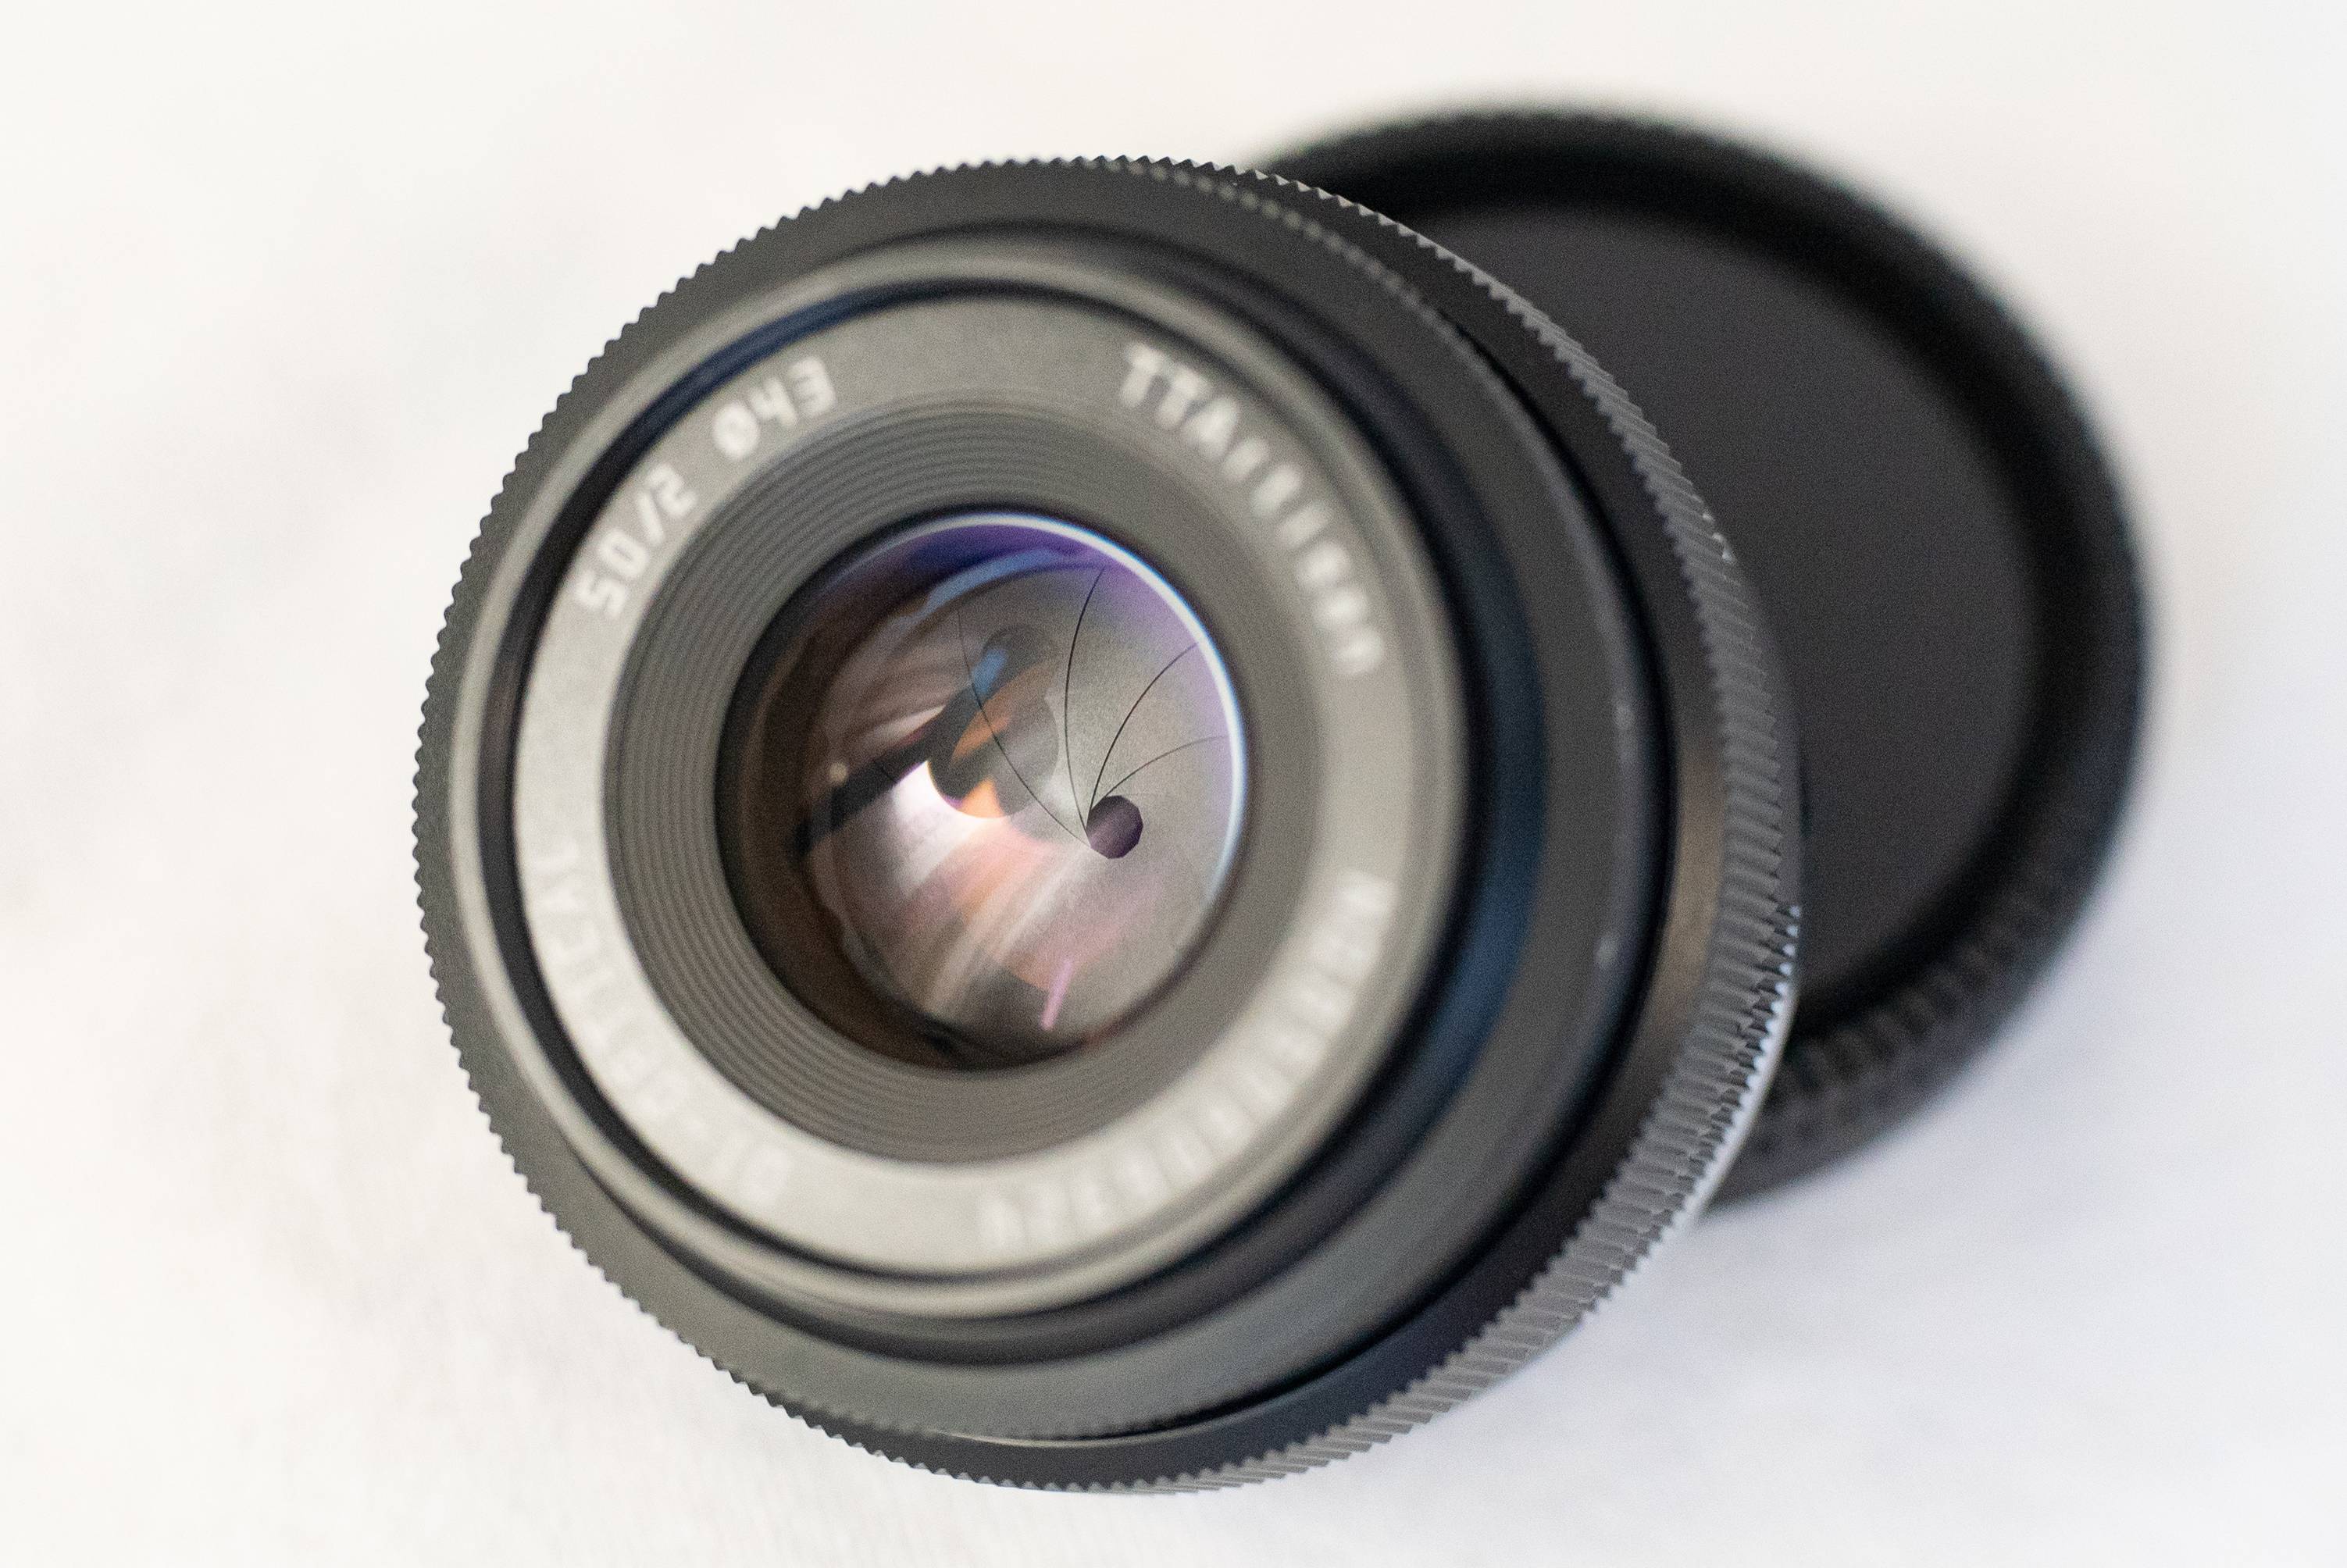 View of the TTArtisan 50/2 aperture at F/16 from the side of the front lens.